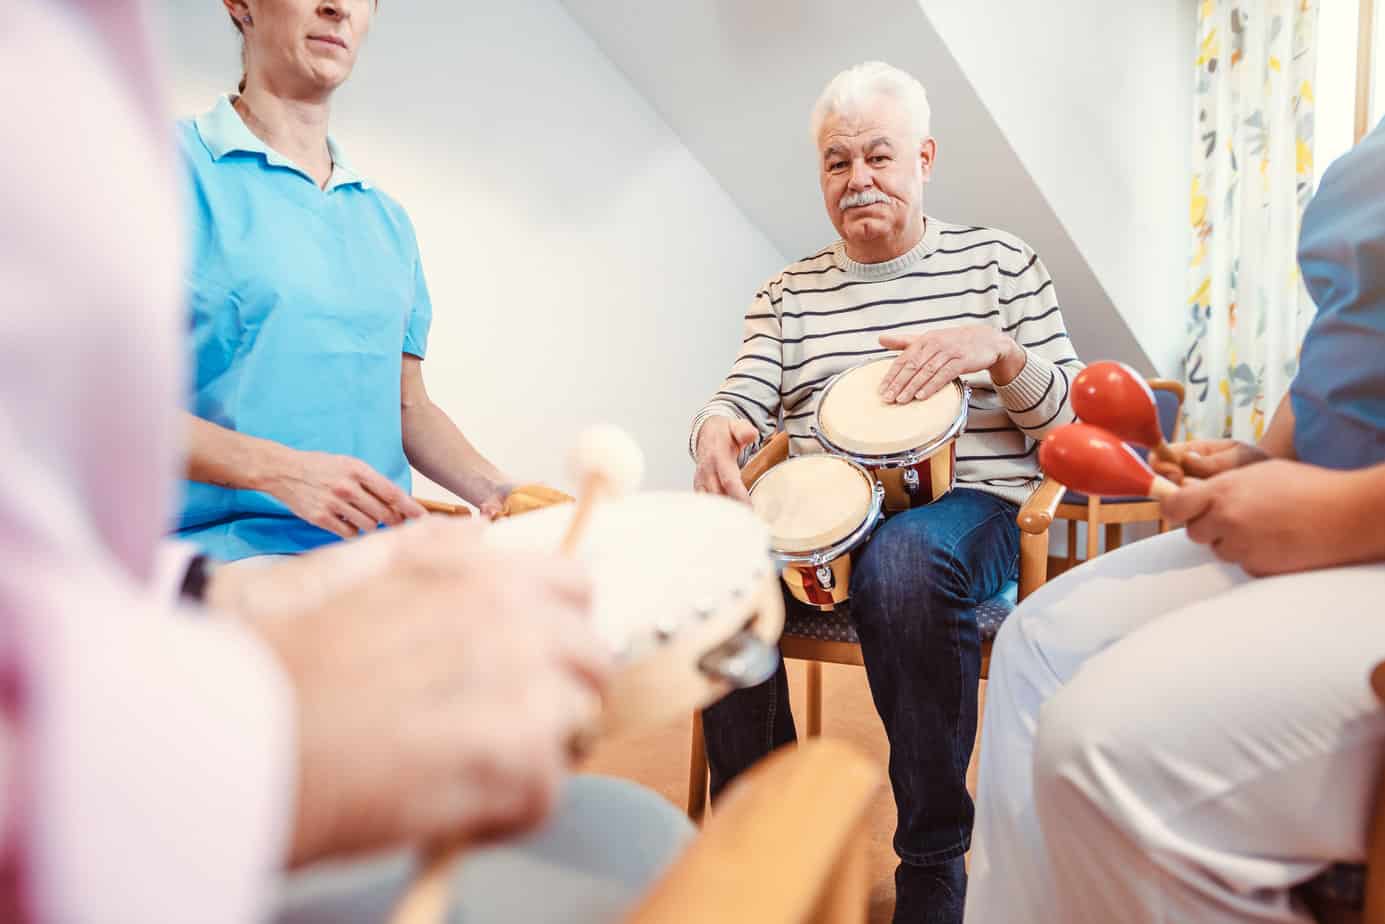 Seniors in nursing home making music with rhythm instruments as musical therapy